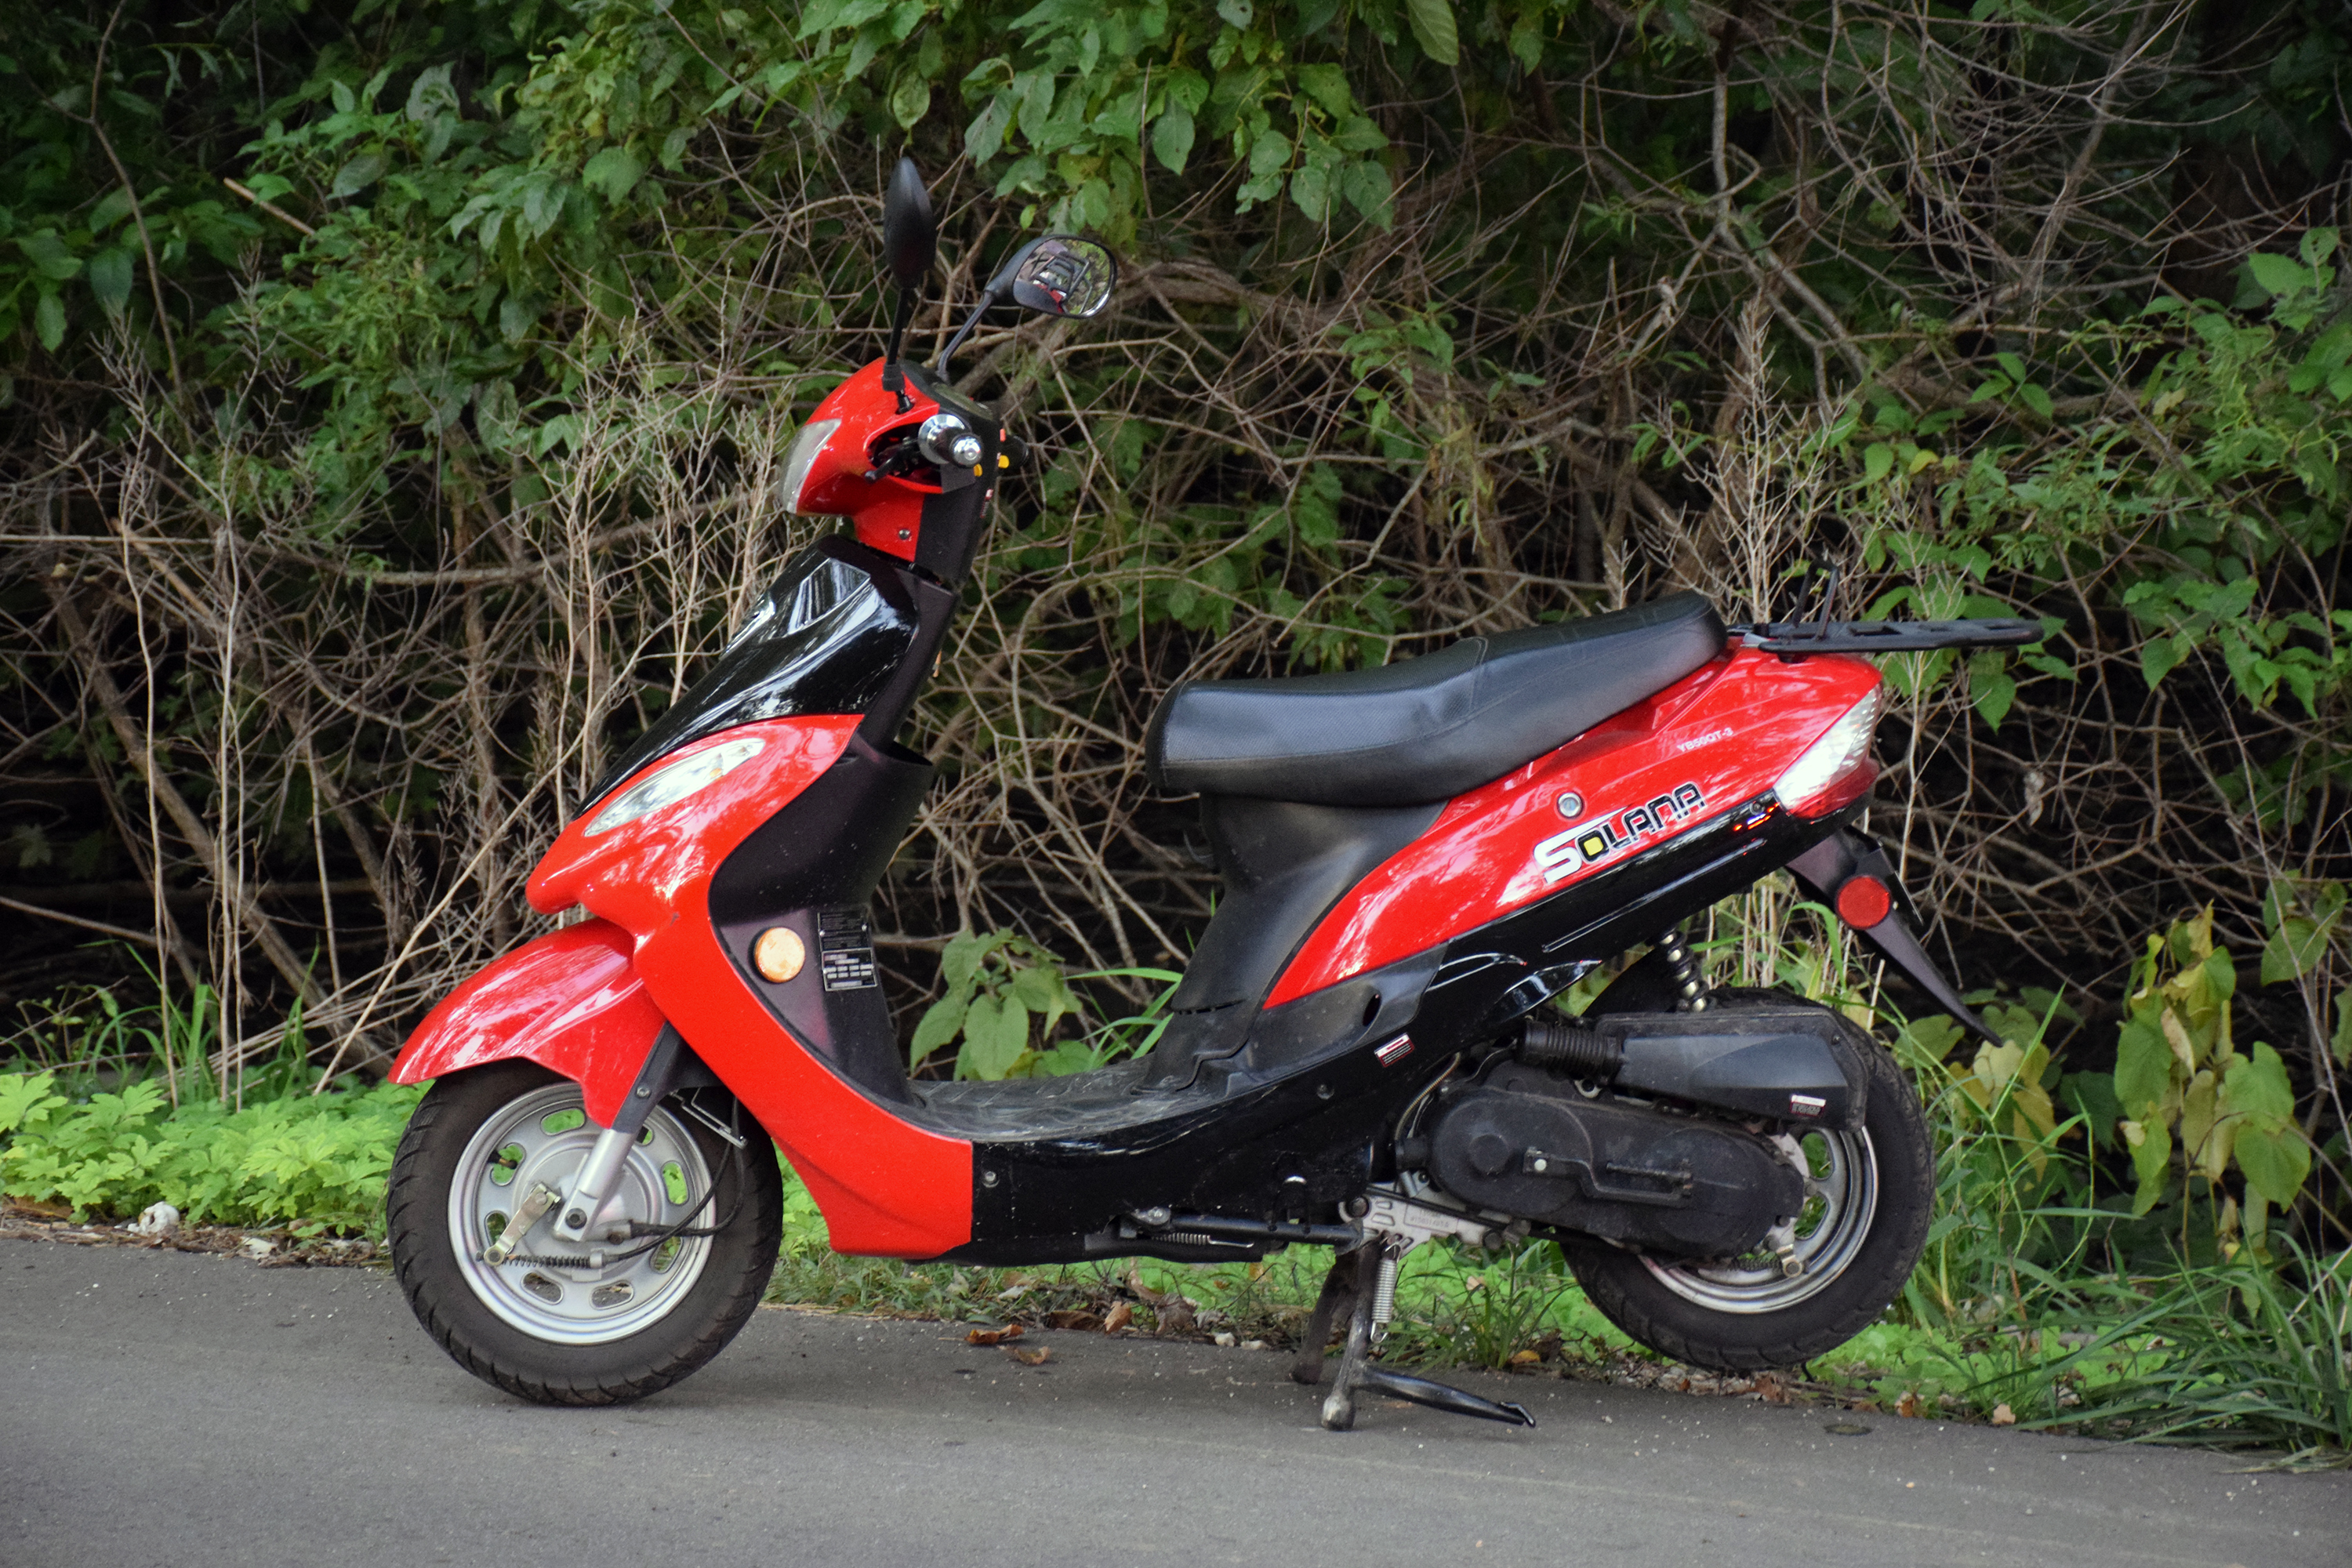 The moped involved in the accident.